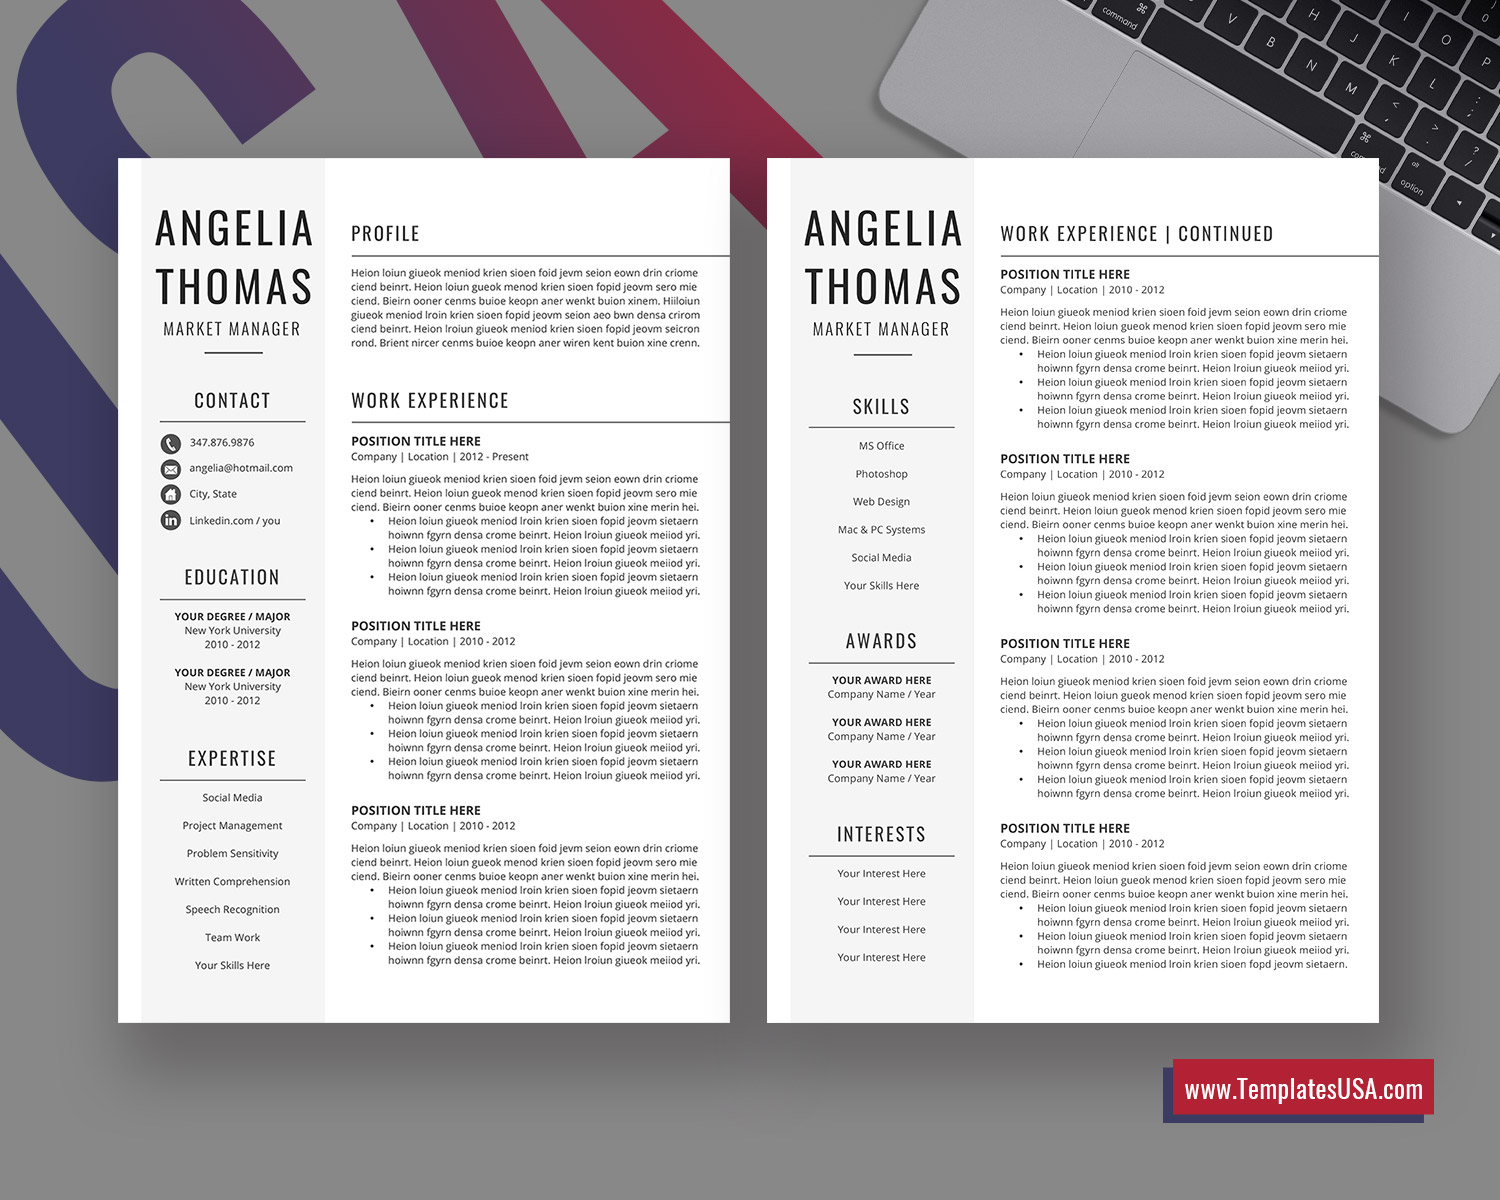 Resume Format In Ms Word from www.templatesusa.com